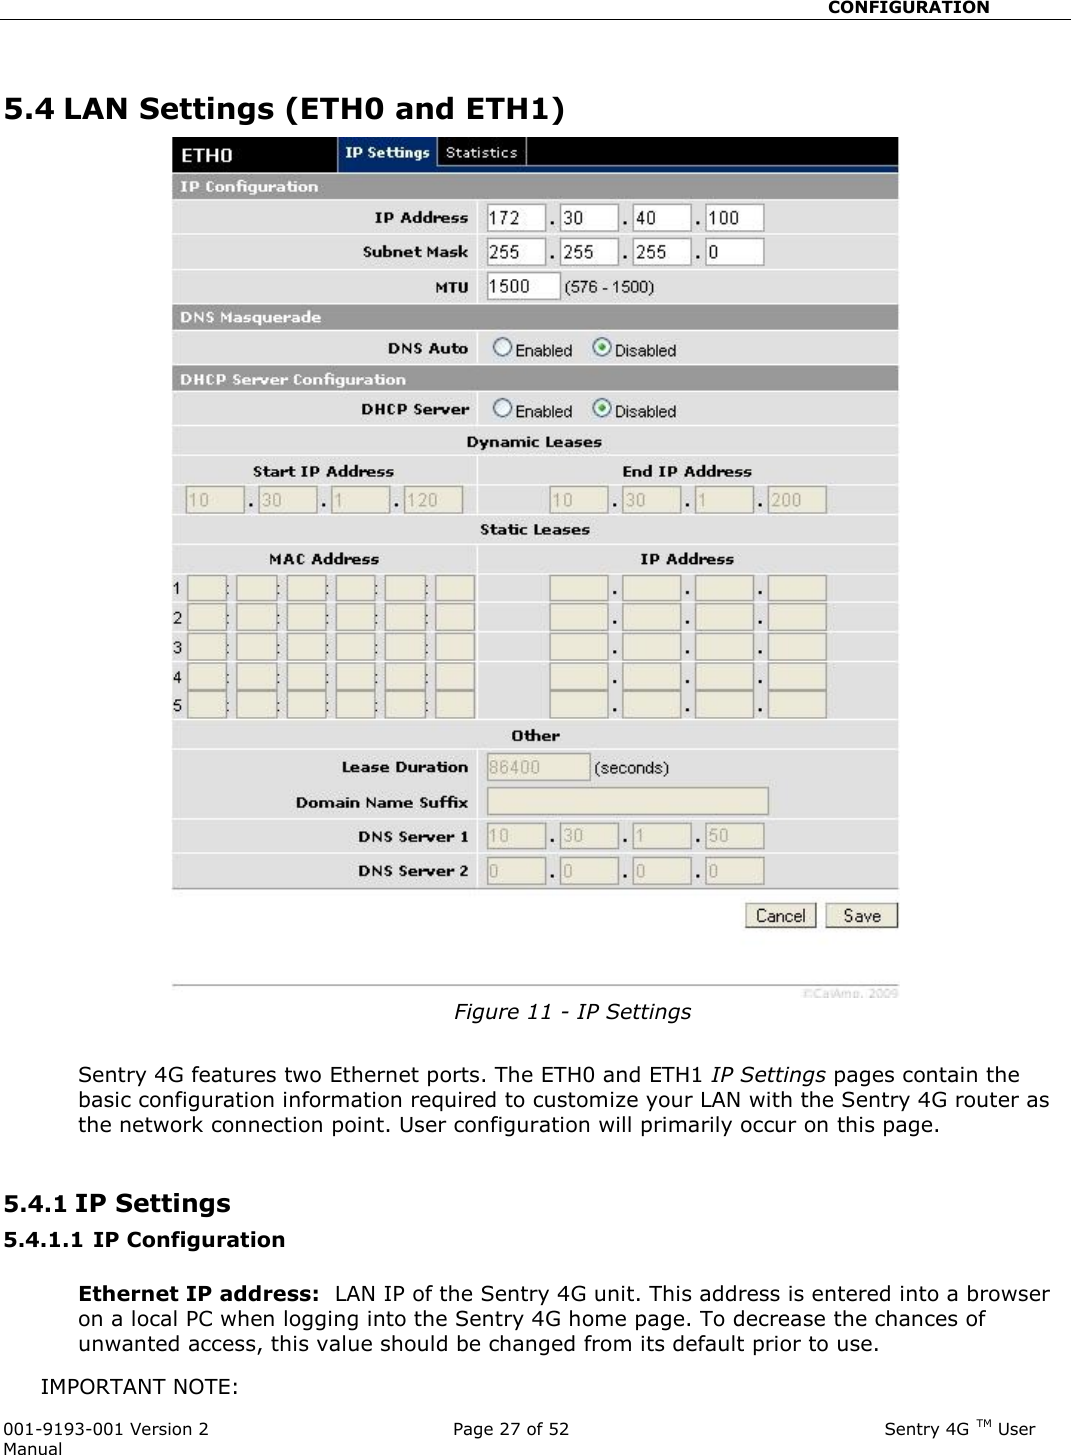                                                       CONFIGURATION  001-9193-001 Version 2              Page 27 of 52                              Sentry 4G TM User Manual  5.4 LAN Settings (ETH0 and ETH1)  Figure 11 - IP Settings  Sentry 4G features two Ethernet ports. The ETH0 and ETH1 IP Settings pages contain the basic configuration information required to customize your LAN with the Sentry 4G router as the network connection point. User configuration will primarily occur on this page.   5.4.1 IP Settings  5.4.1.1 IP Configuration  Ethernet IP address:  LAN IP of the Sentry 4G unit. This address is entered into a browser on a local PC when logging into the Sentry 4G home page. To decrease the chances of unwanted access, this value should be changed from its default prior to use.   IMPORTANT NOTE:   